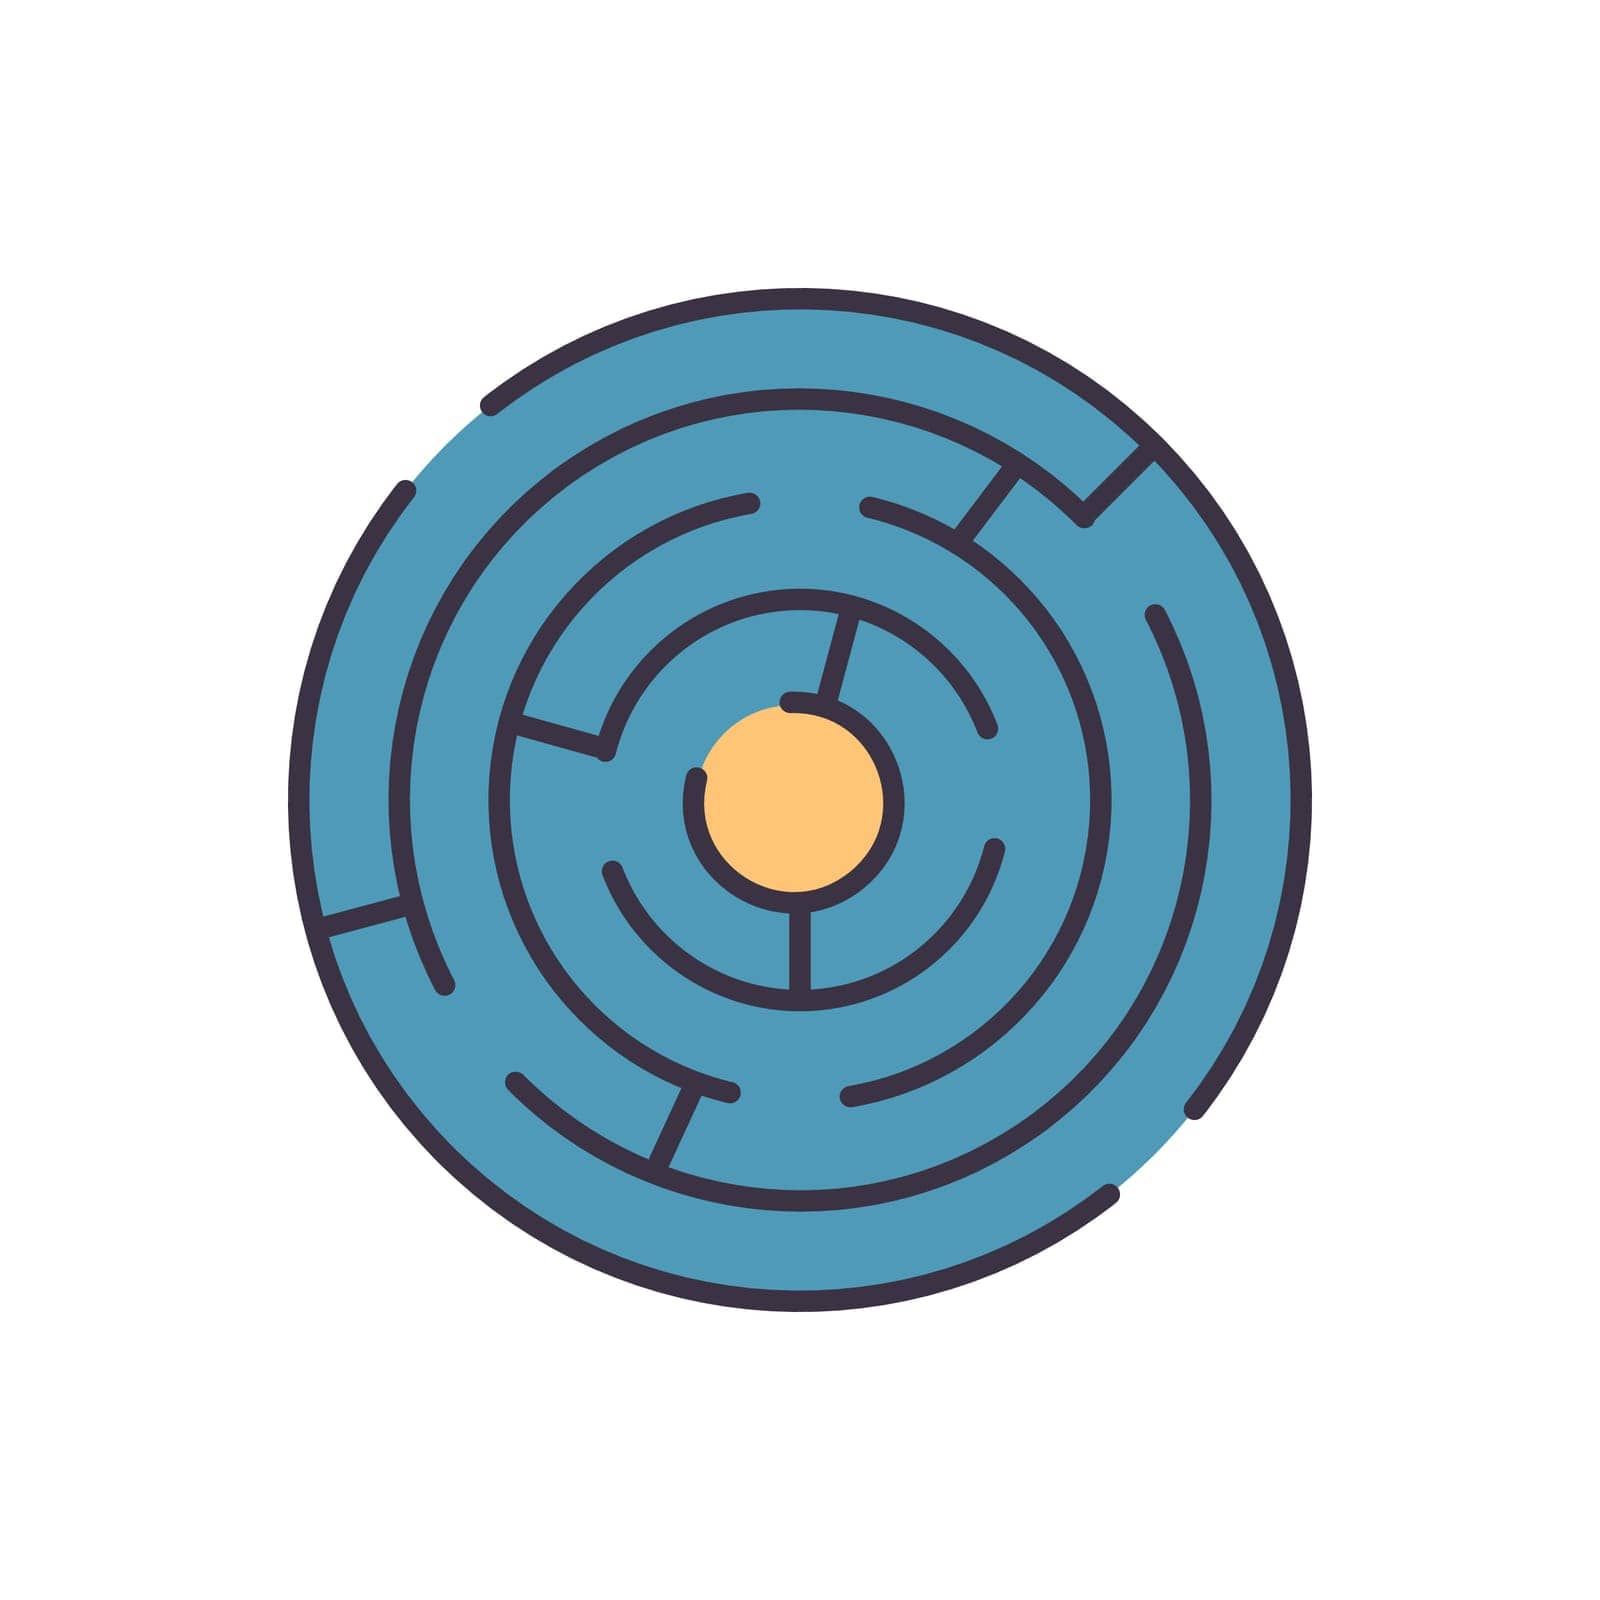 Labyrinth related vector icon by smoki